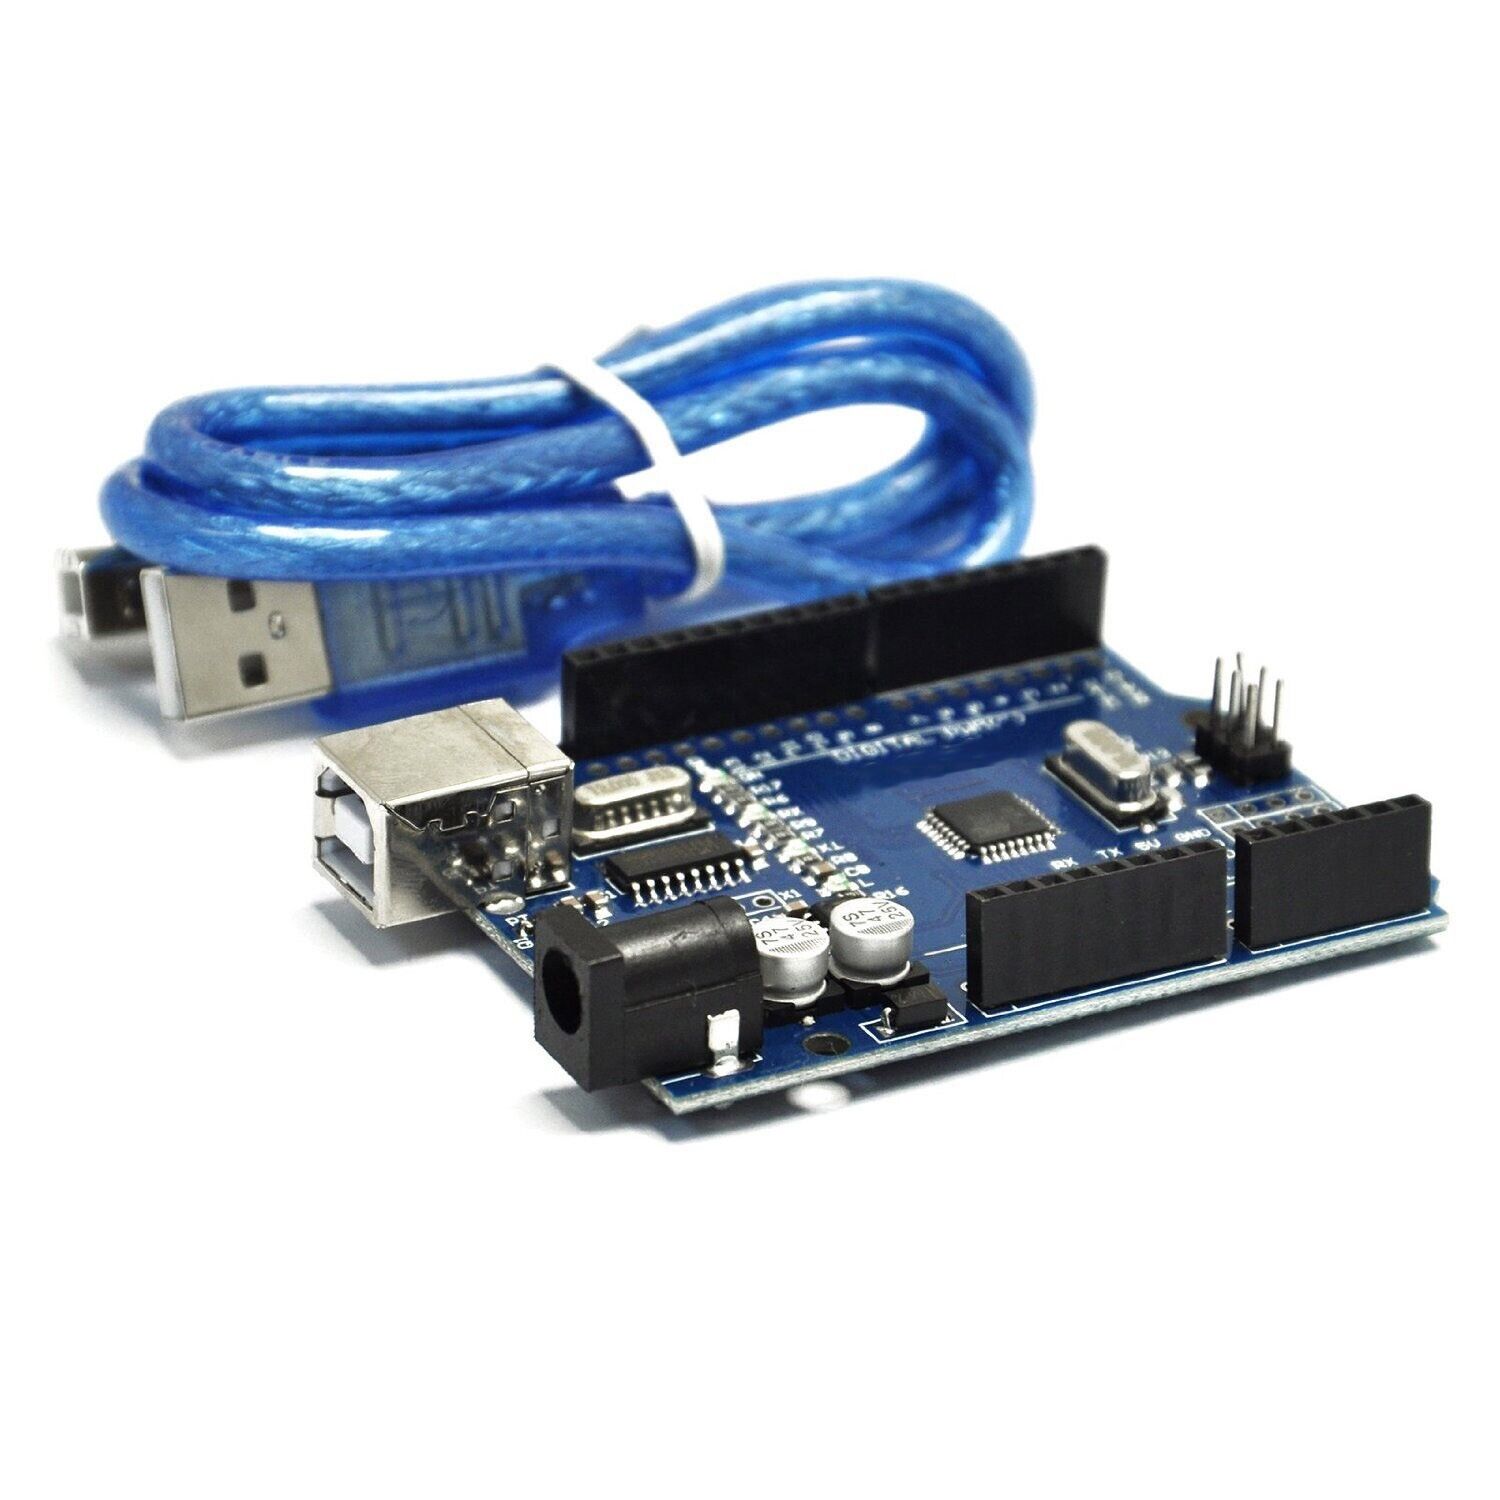 ATmega328P CH340 USB Microcontroller Board with USB Cable